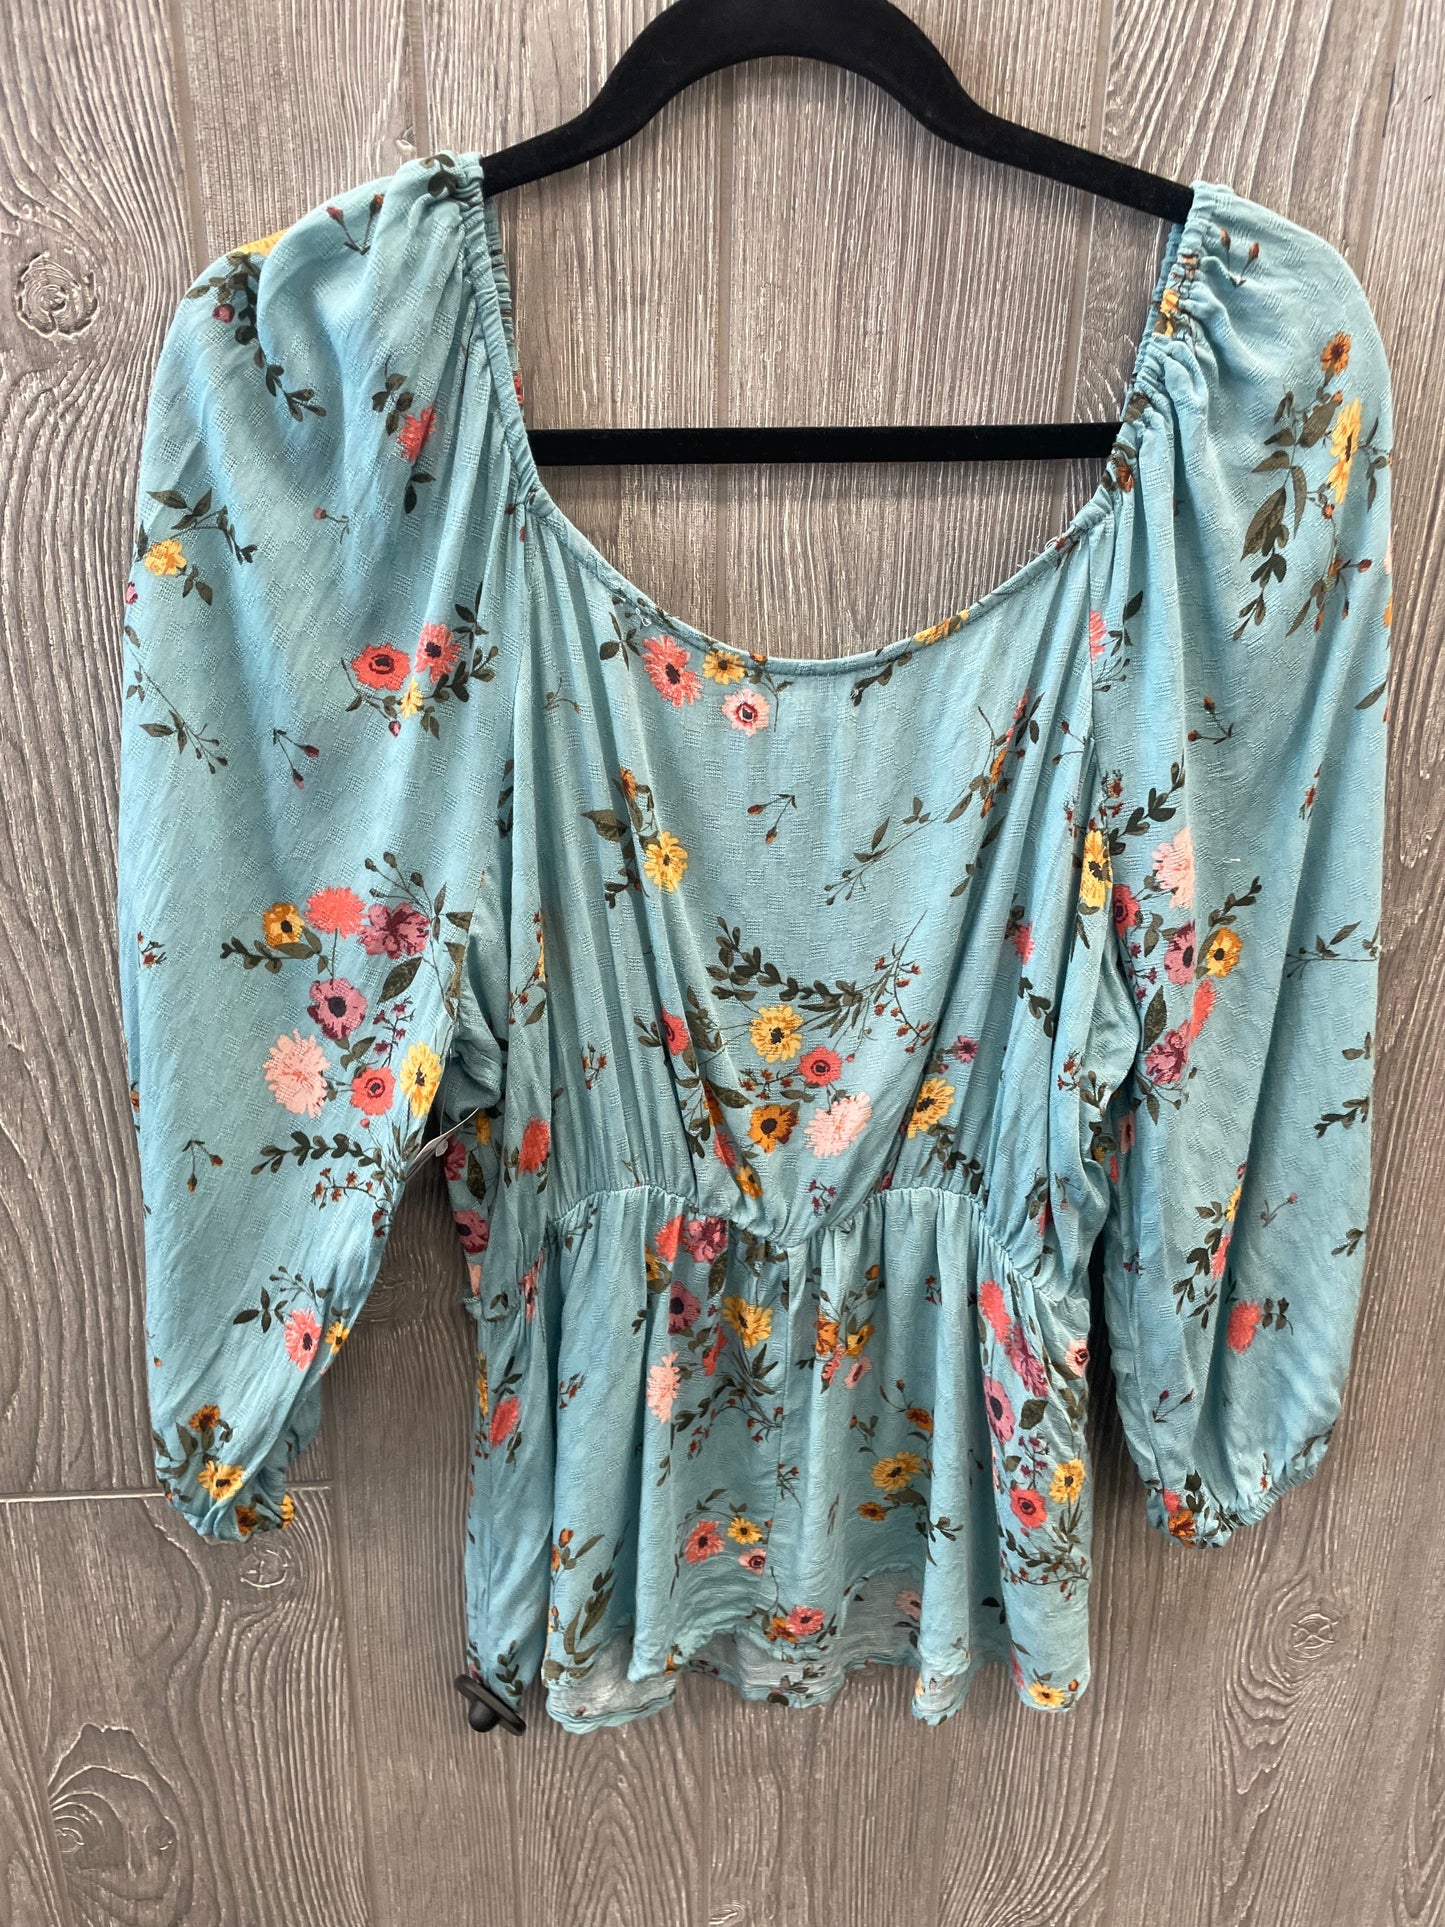 Teal Top Long Sleeve Maurices, Size M